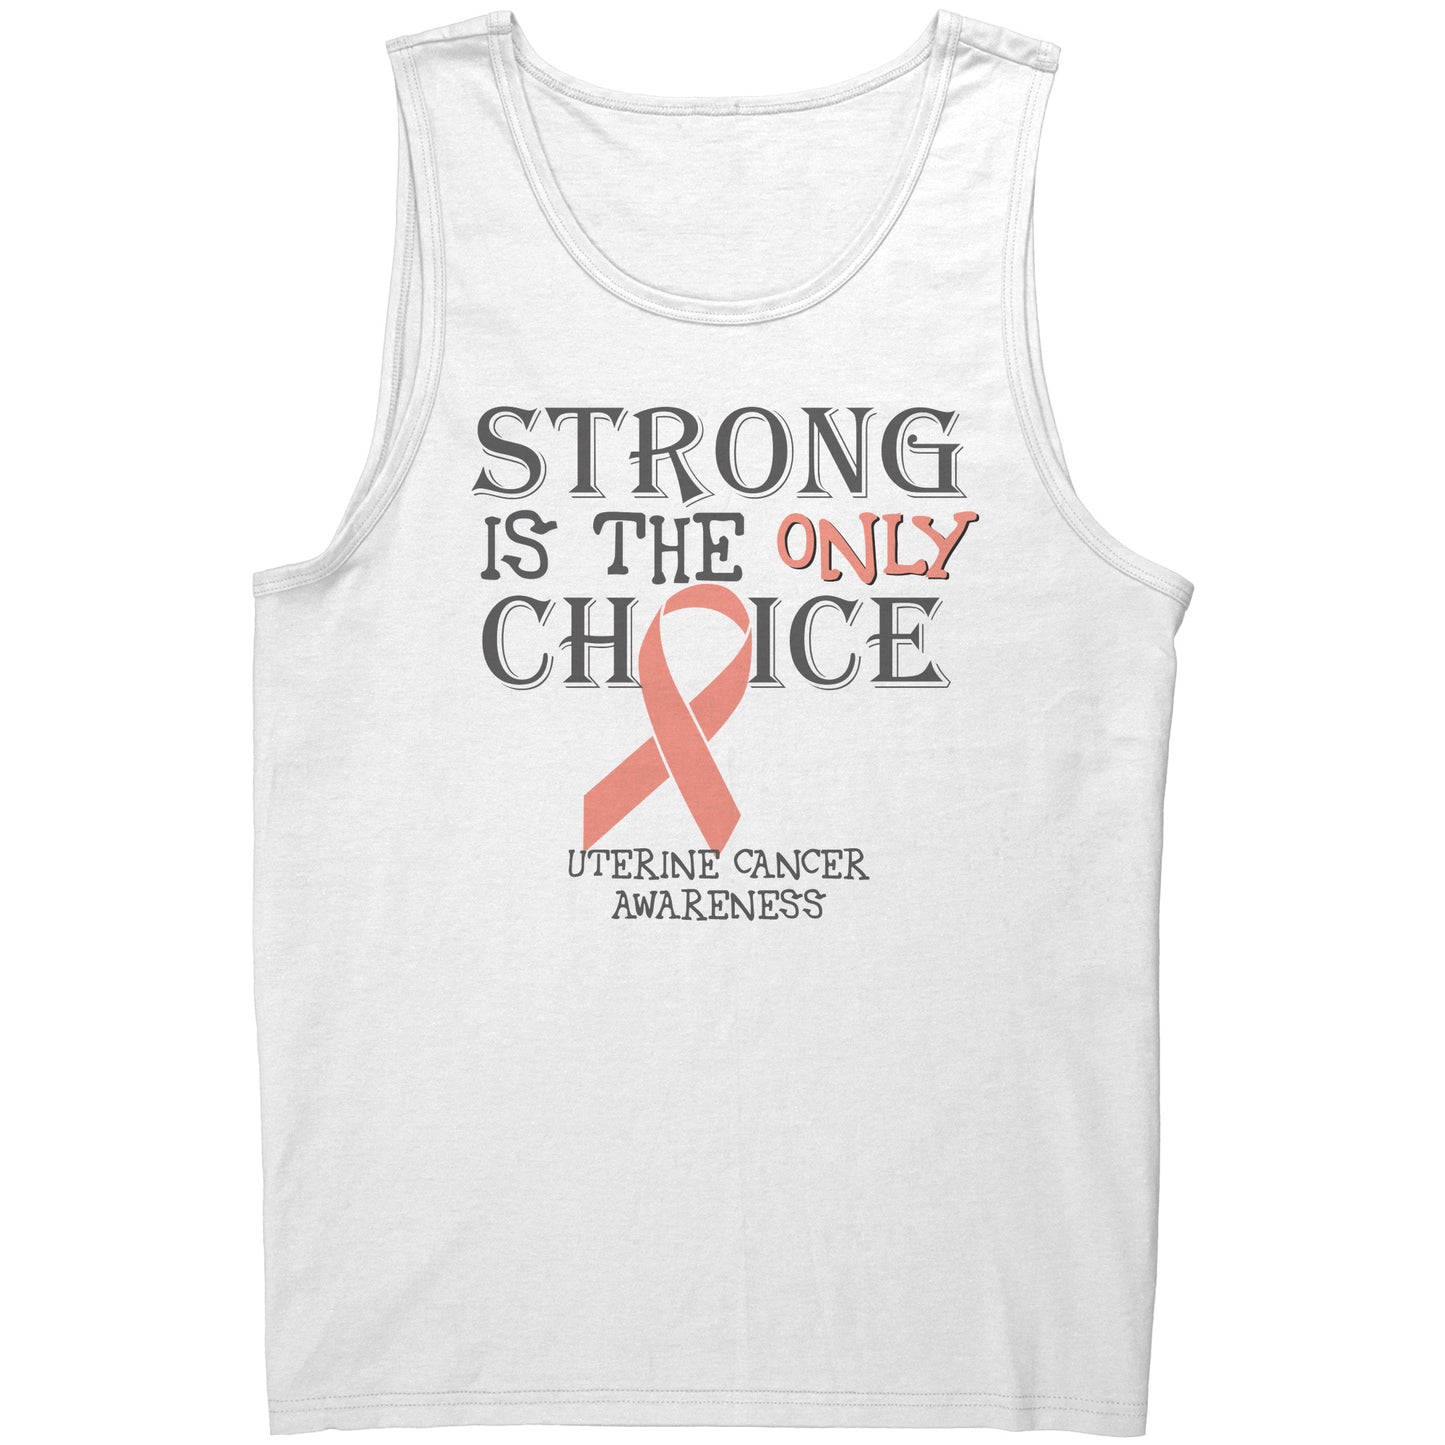 Strong is the Only Choice -Uterine Cancer Awareness T-Shirt, Hoodie, Tank